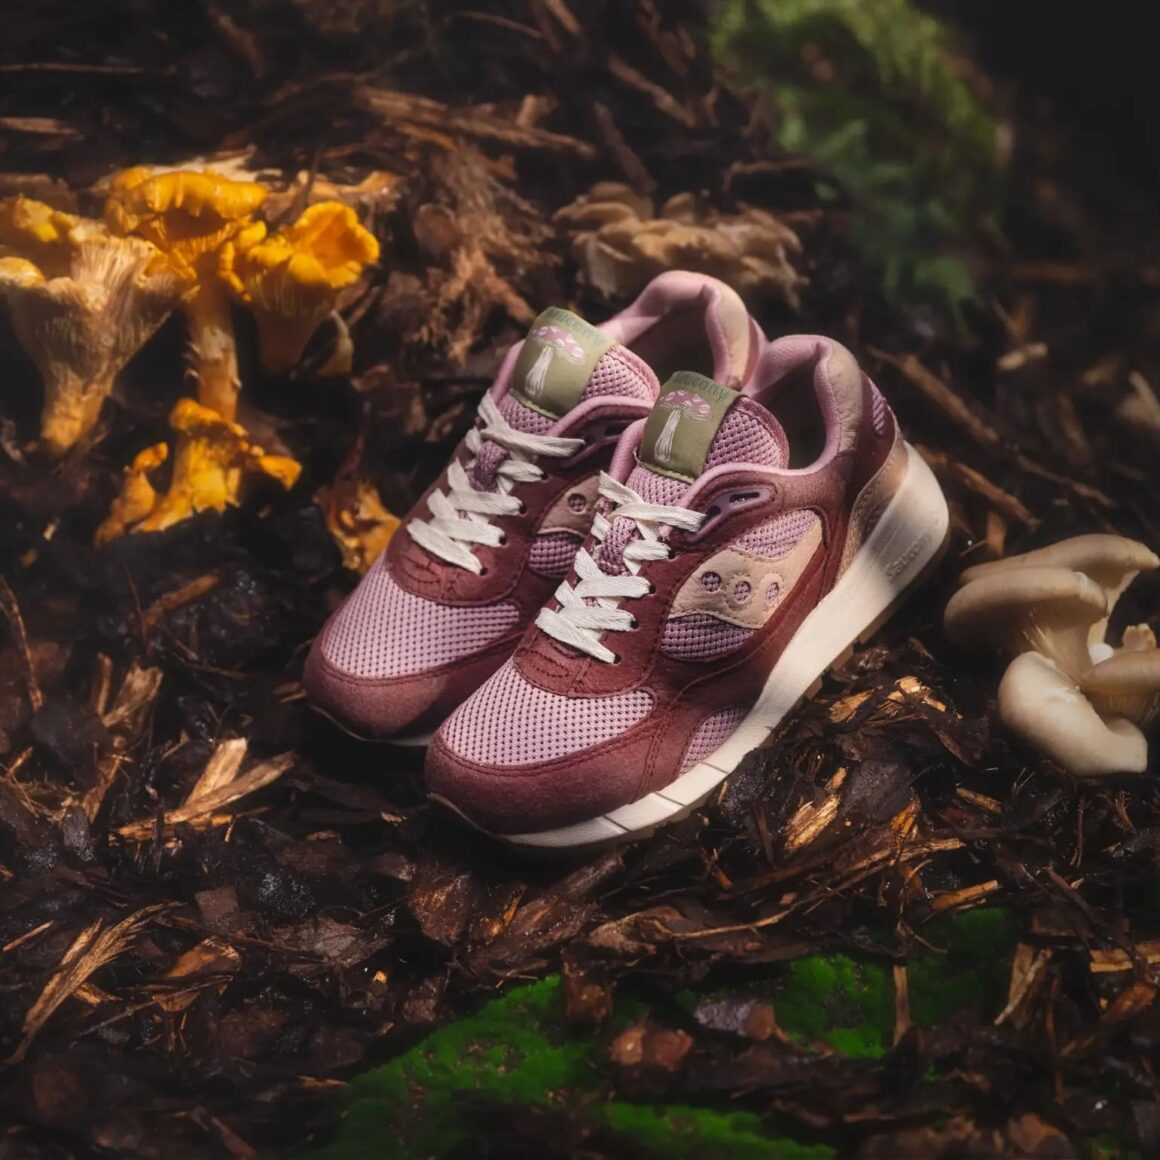 Saucony Shaodw 6000 Mushroom Pack S70747-2 Full Shoes